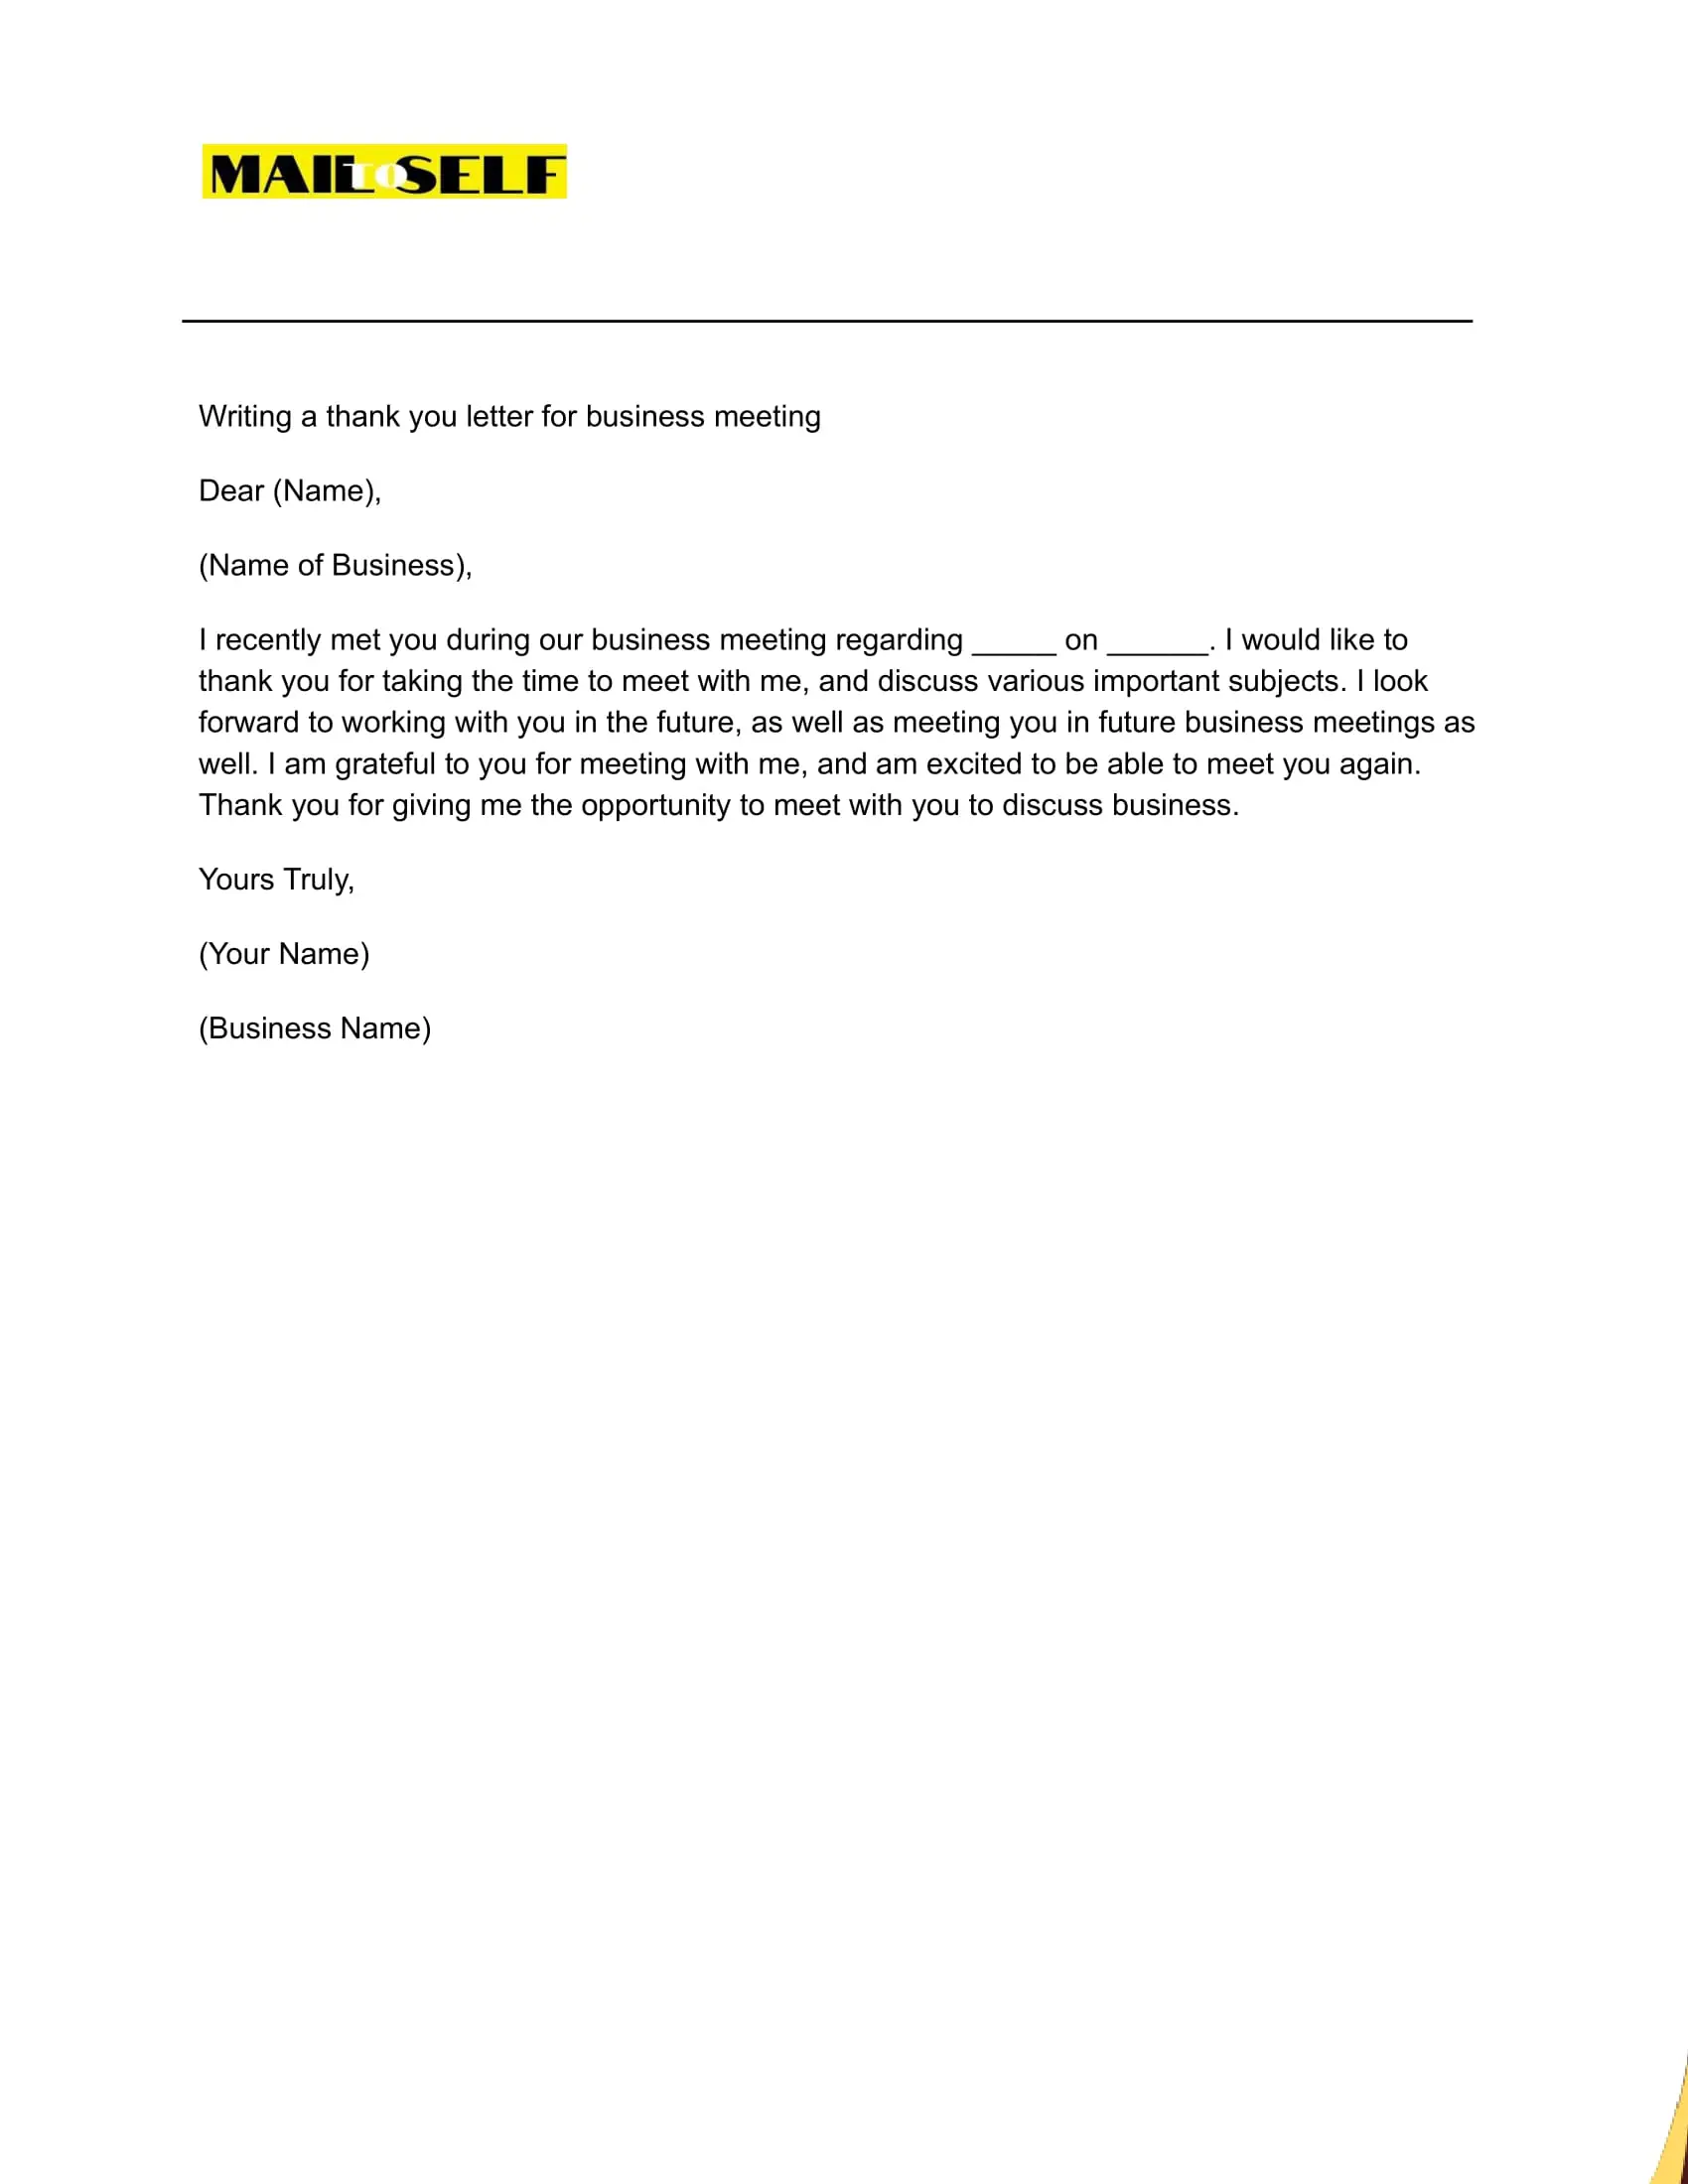 Sample #1 Thank You Letter for Business Meeting